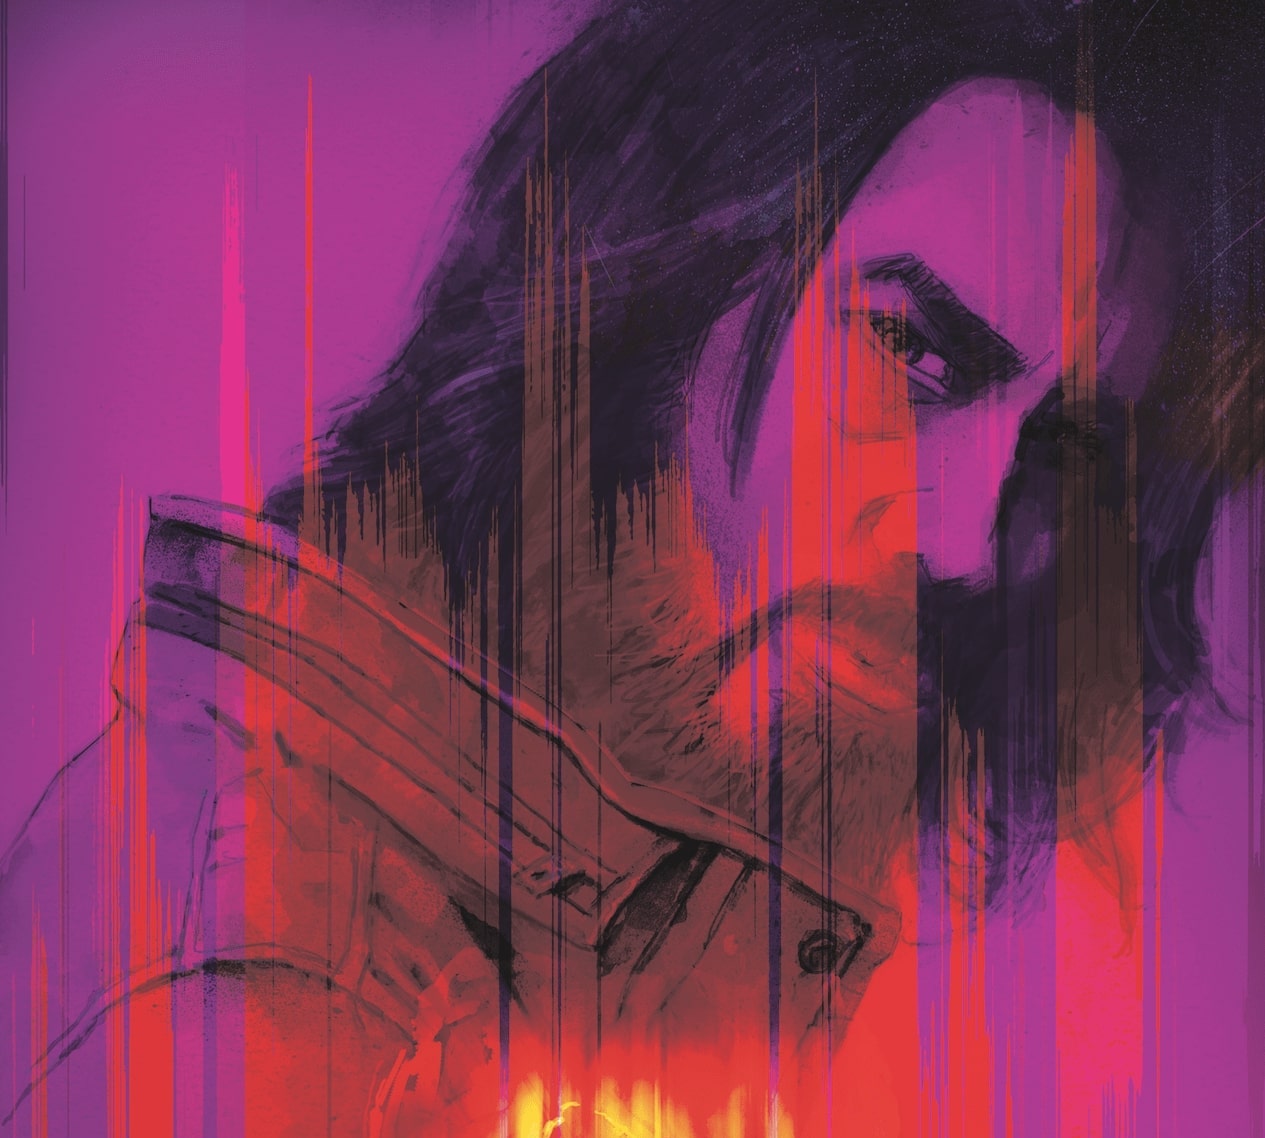 'Phantom on the Scan' #1 is beautiful, but frustrating